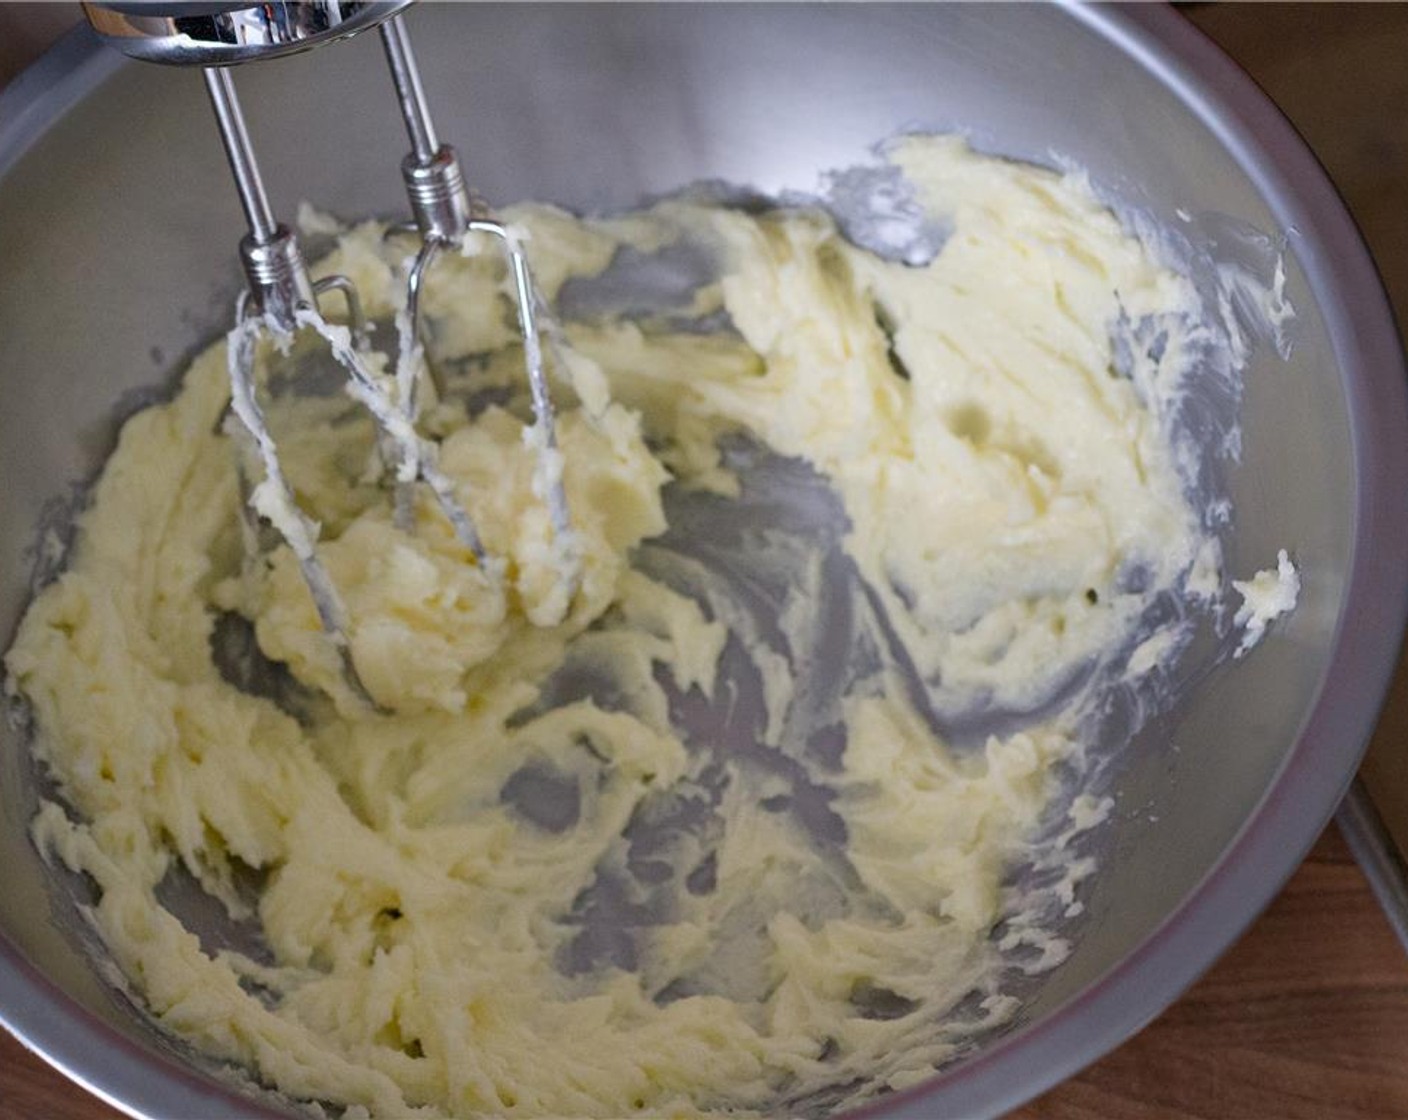 step 3 In another medium bowl, beat together the Unsalted Butter (1 cup) and Rose Water (1/2 Tbsp) for about a minute, until smooth and creamy.